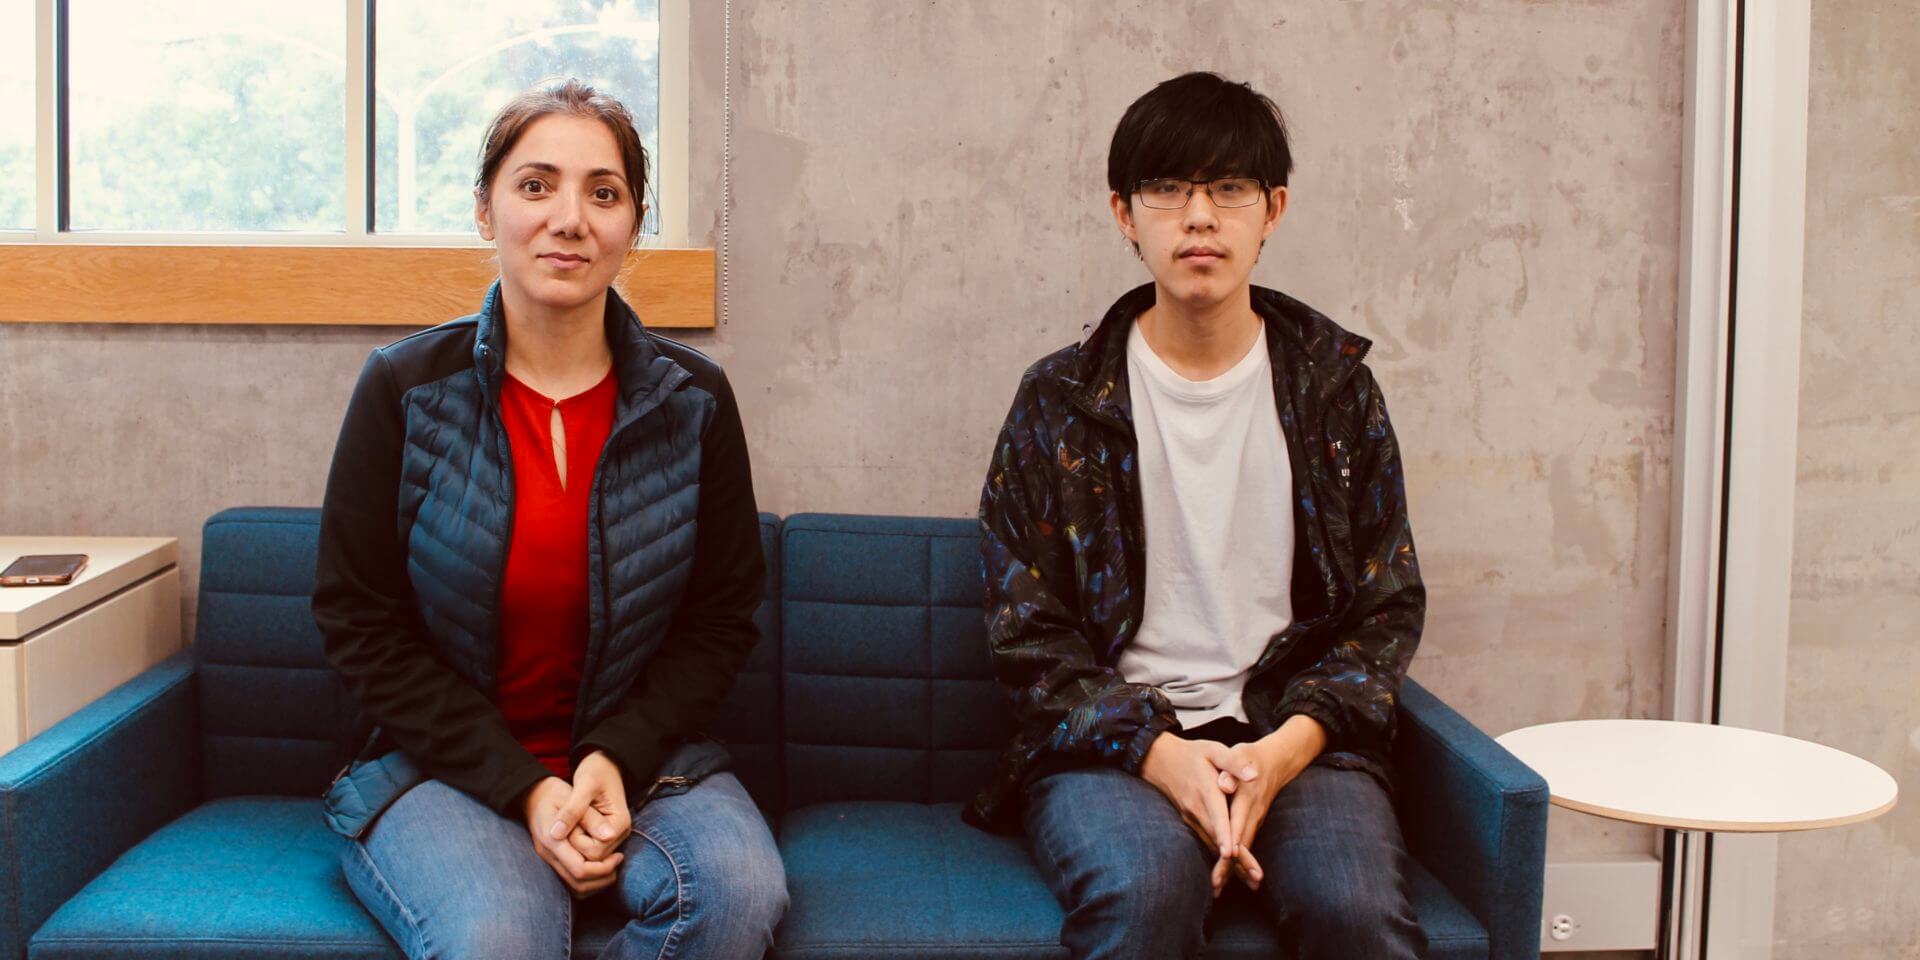 Professor Mercedeh Khajavikhan (left) and undergrad Haoqin Deng combined their different backgrounds to improve AI technology (PHOTO CREDIT: USC Viterbi)